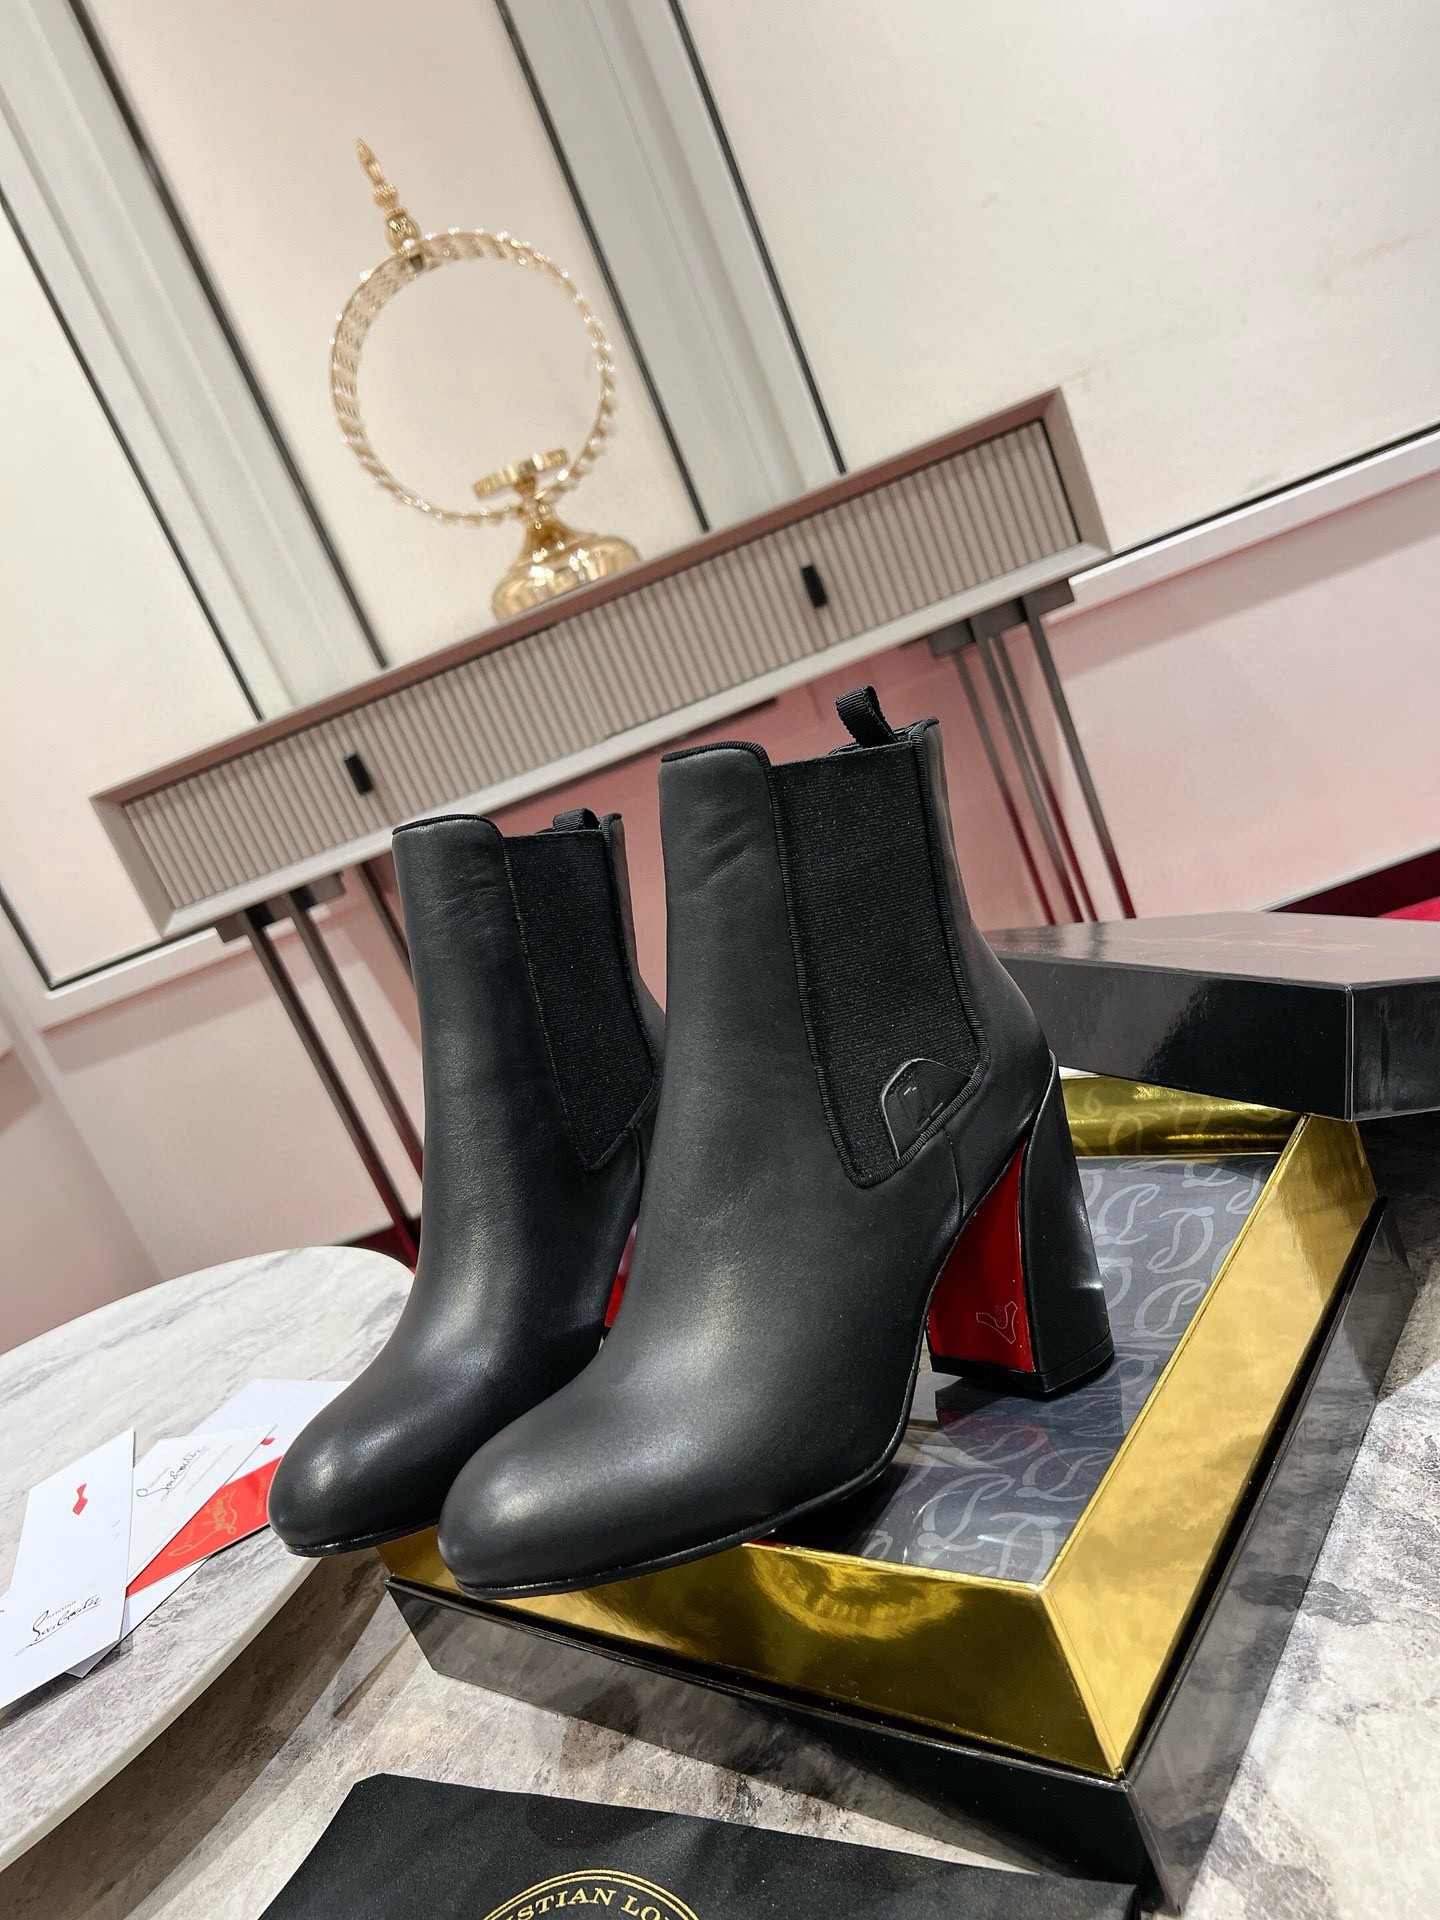 Replica Christian Louboutin Turelastic 85mm Ankle Boots in Black Leather